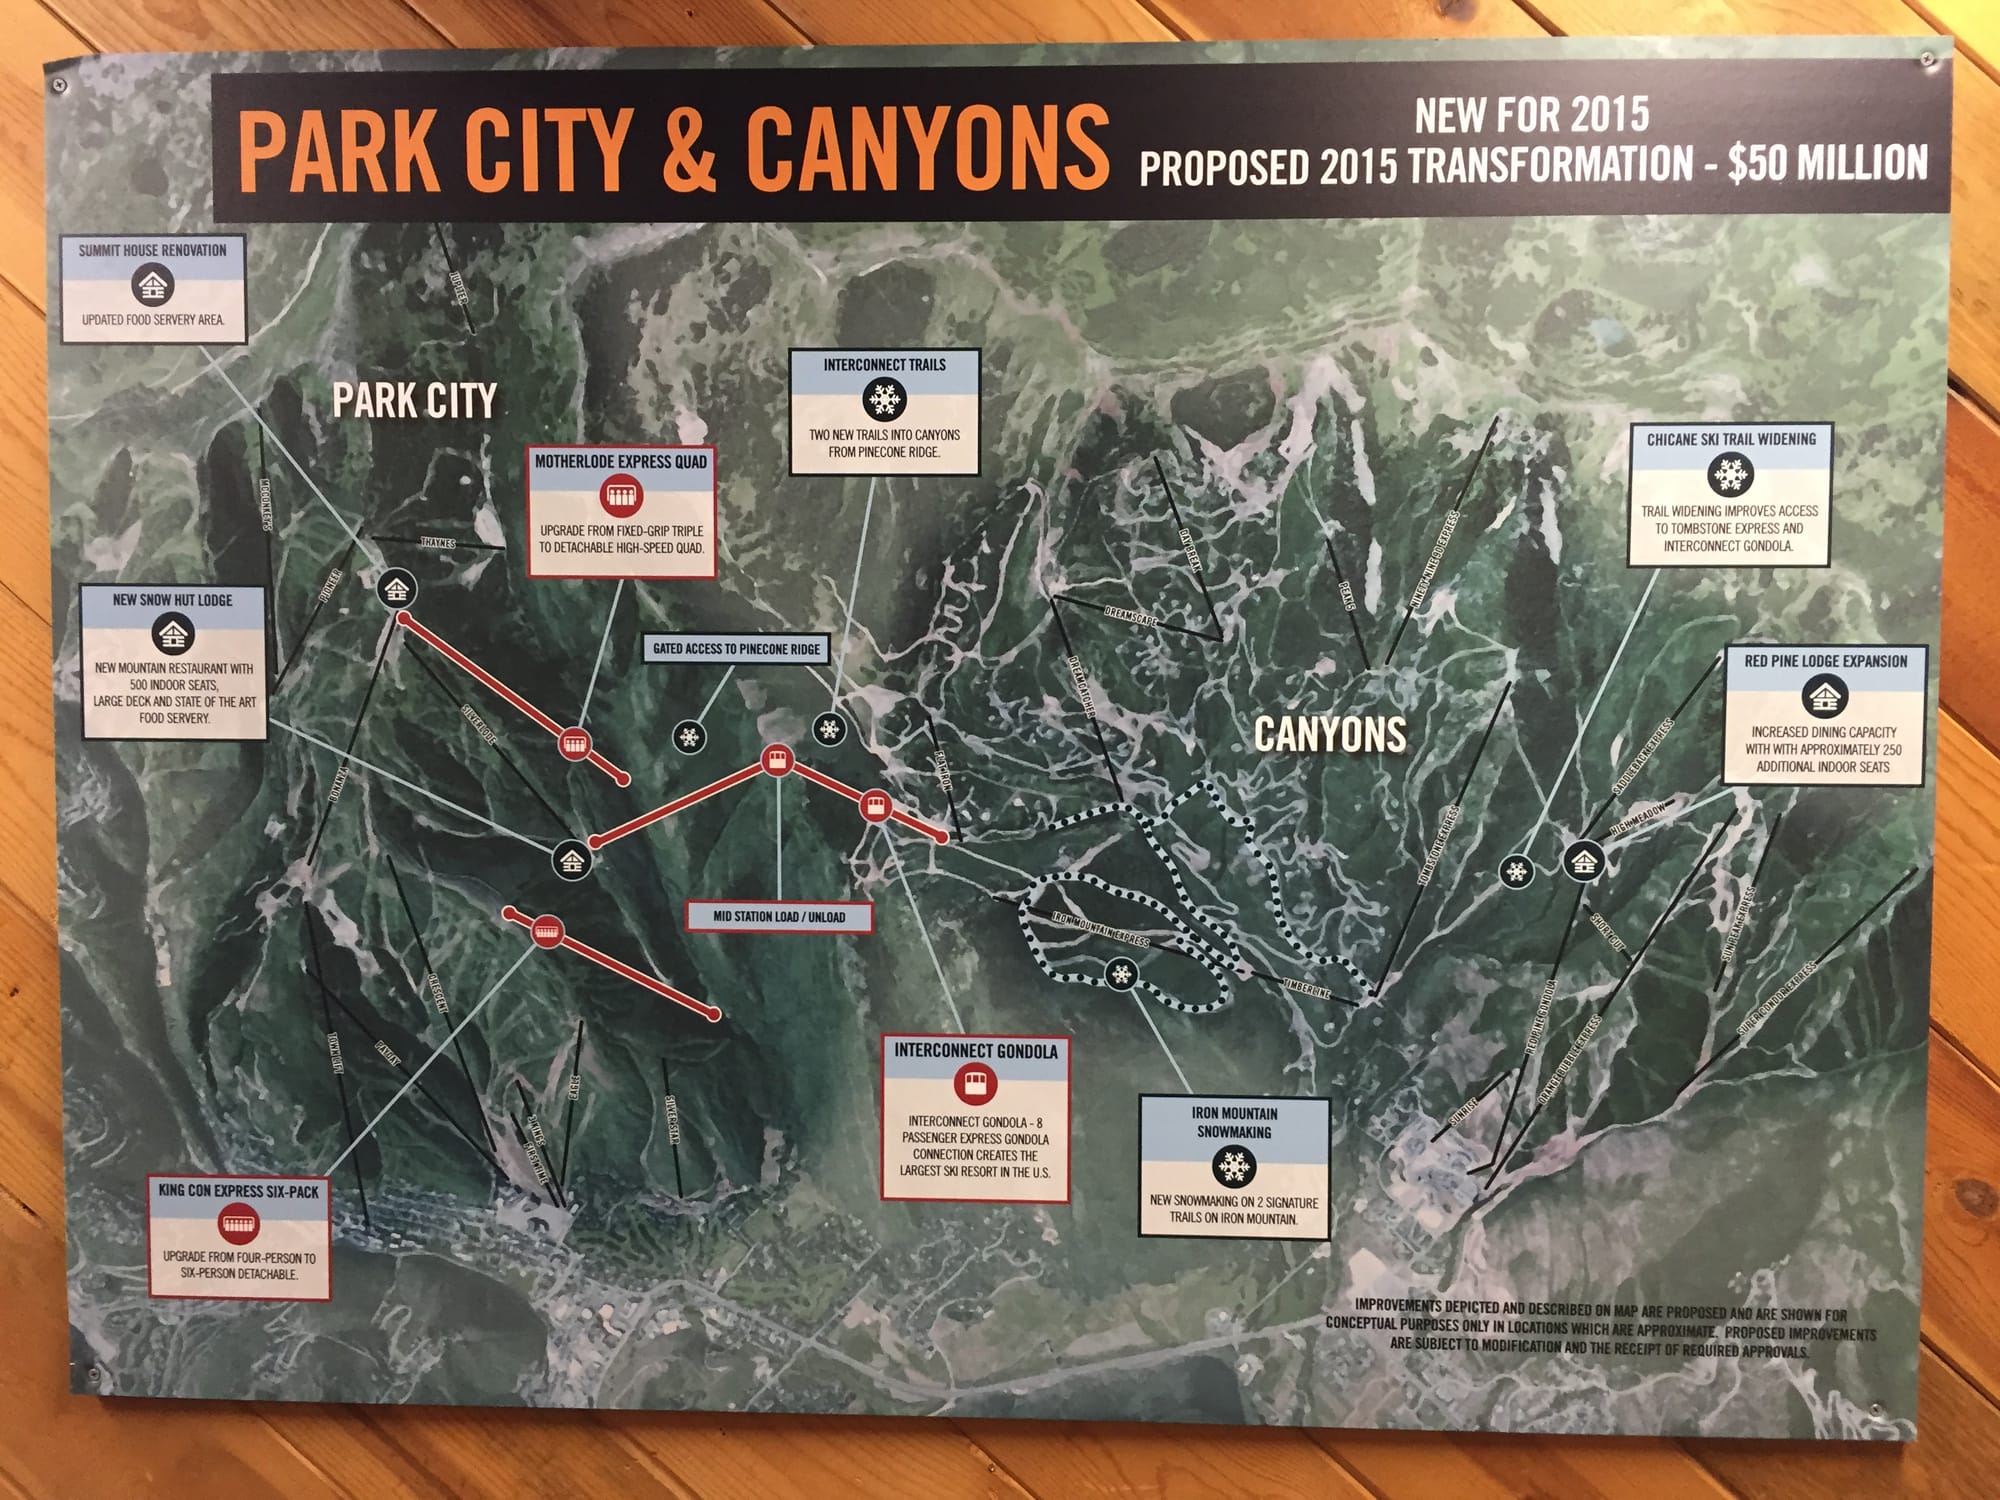 Photo by Author — Summer 2015 upgrade plans for Park City, Utah